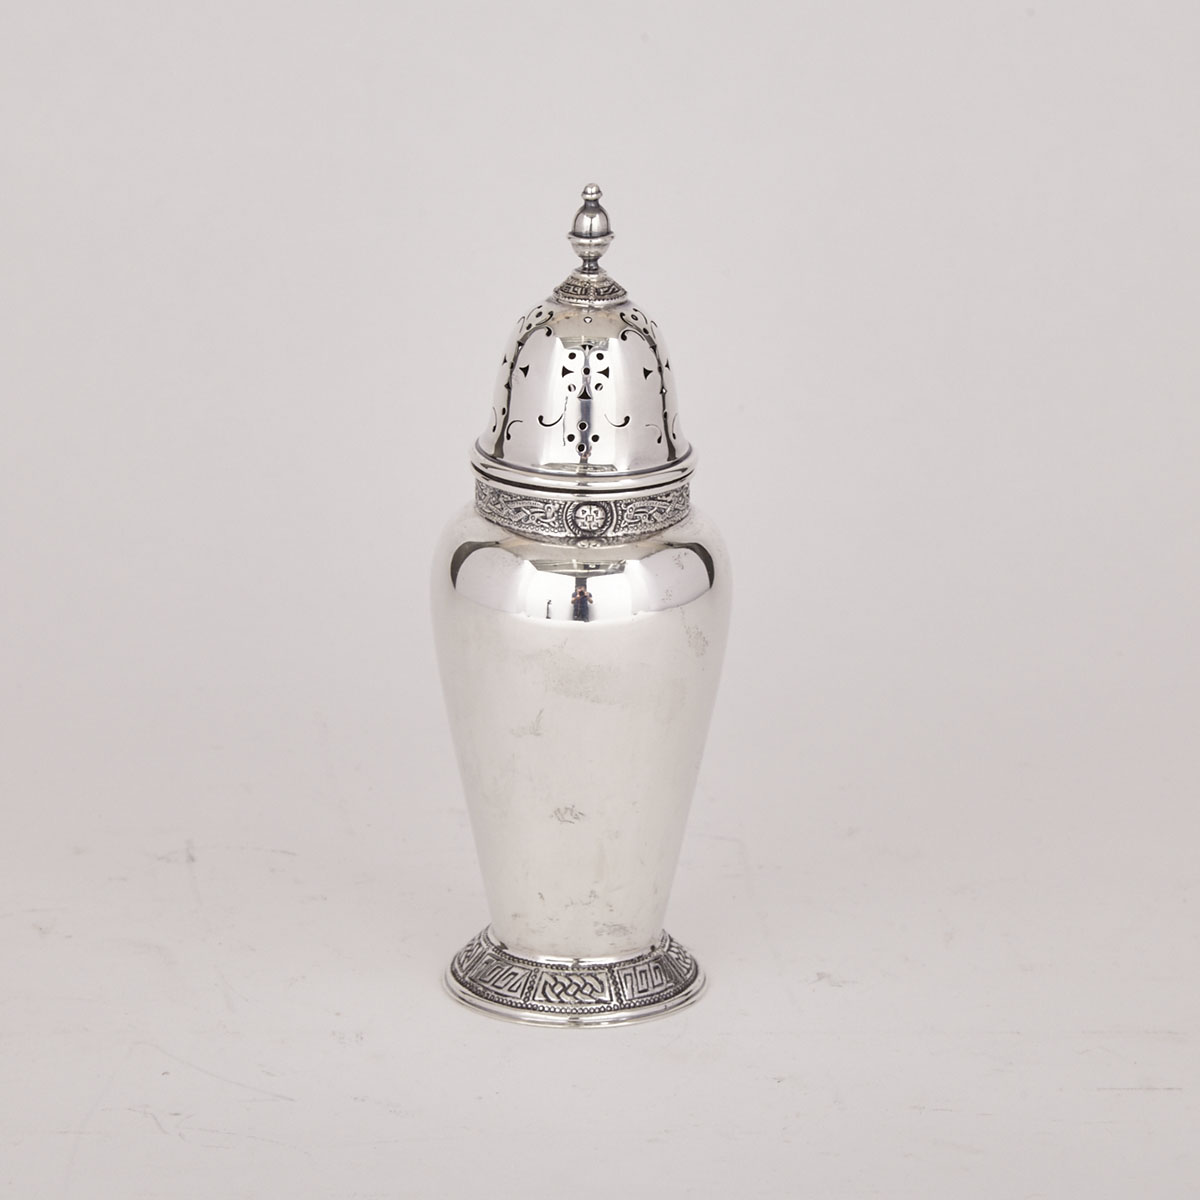 Canadian Silver Sugar Caster, Henry Birks & Sons, Montreal, Que., 1929